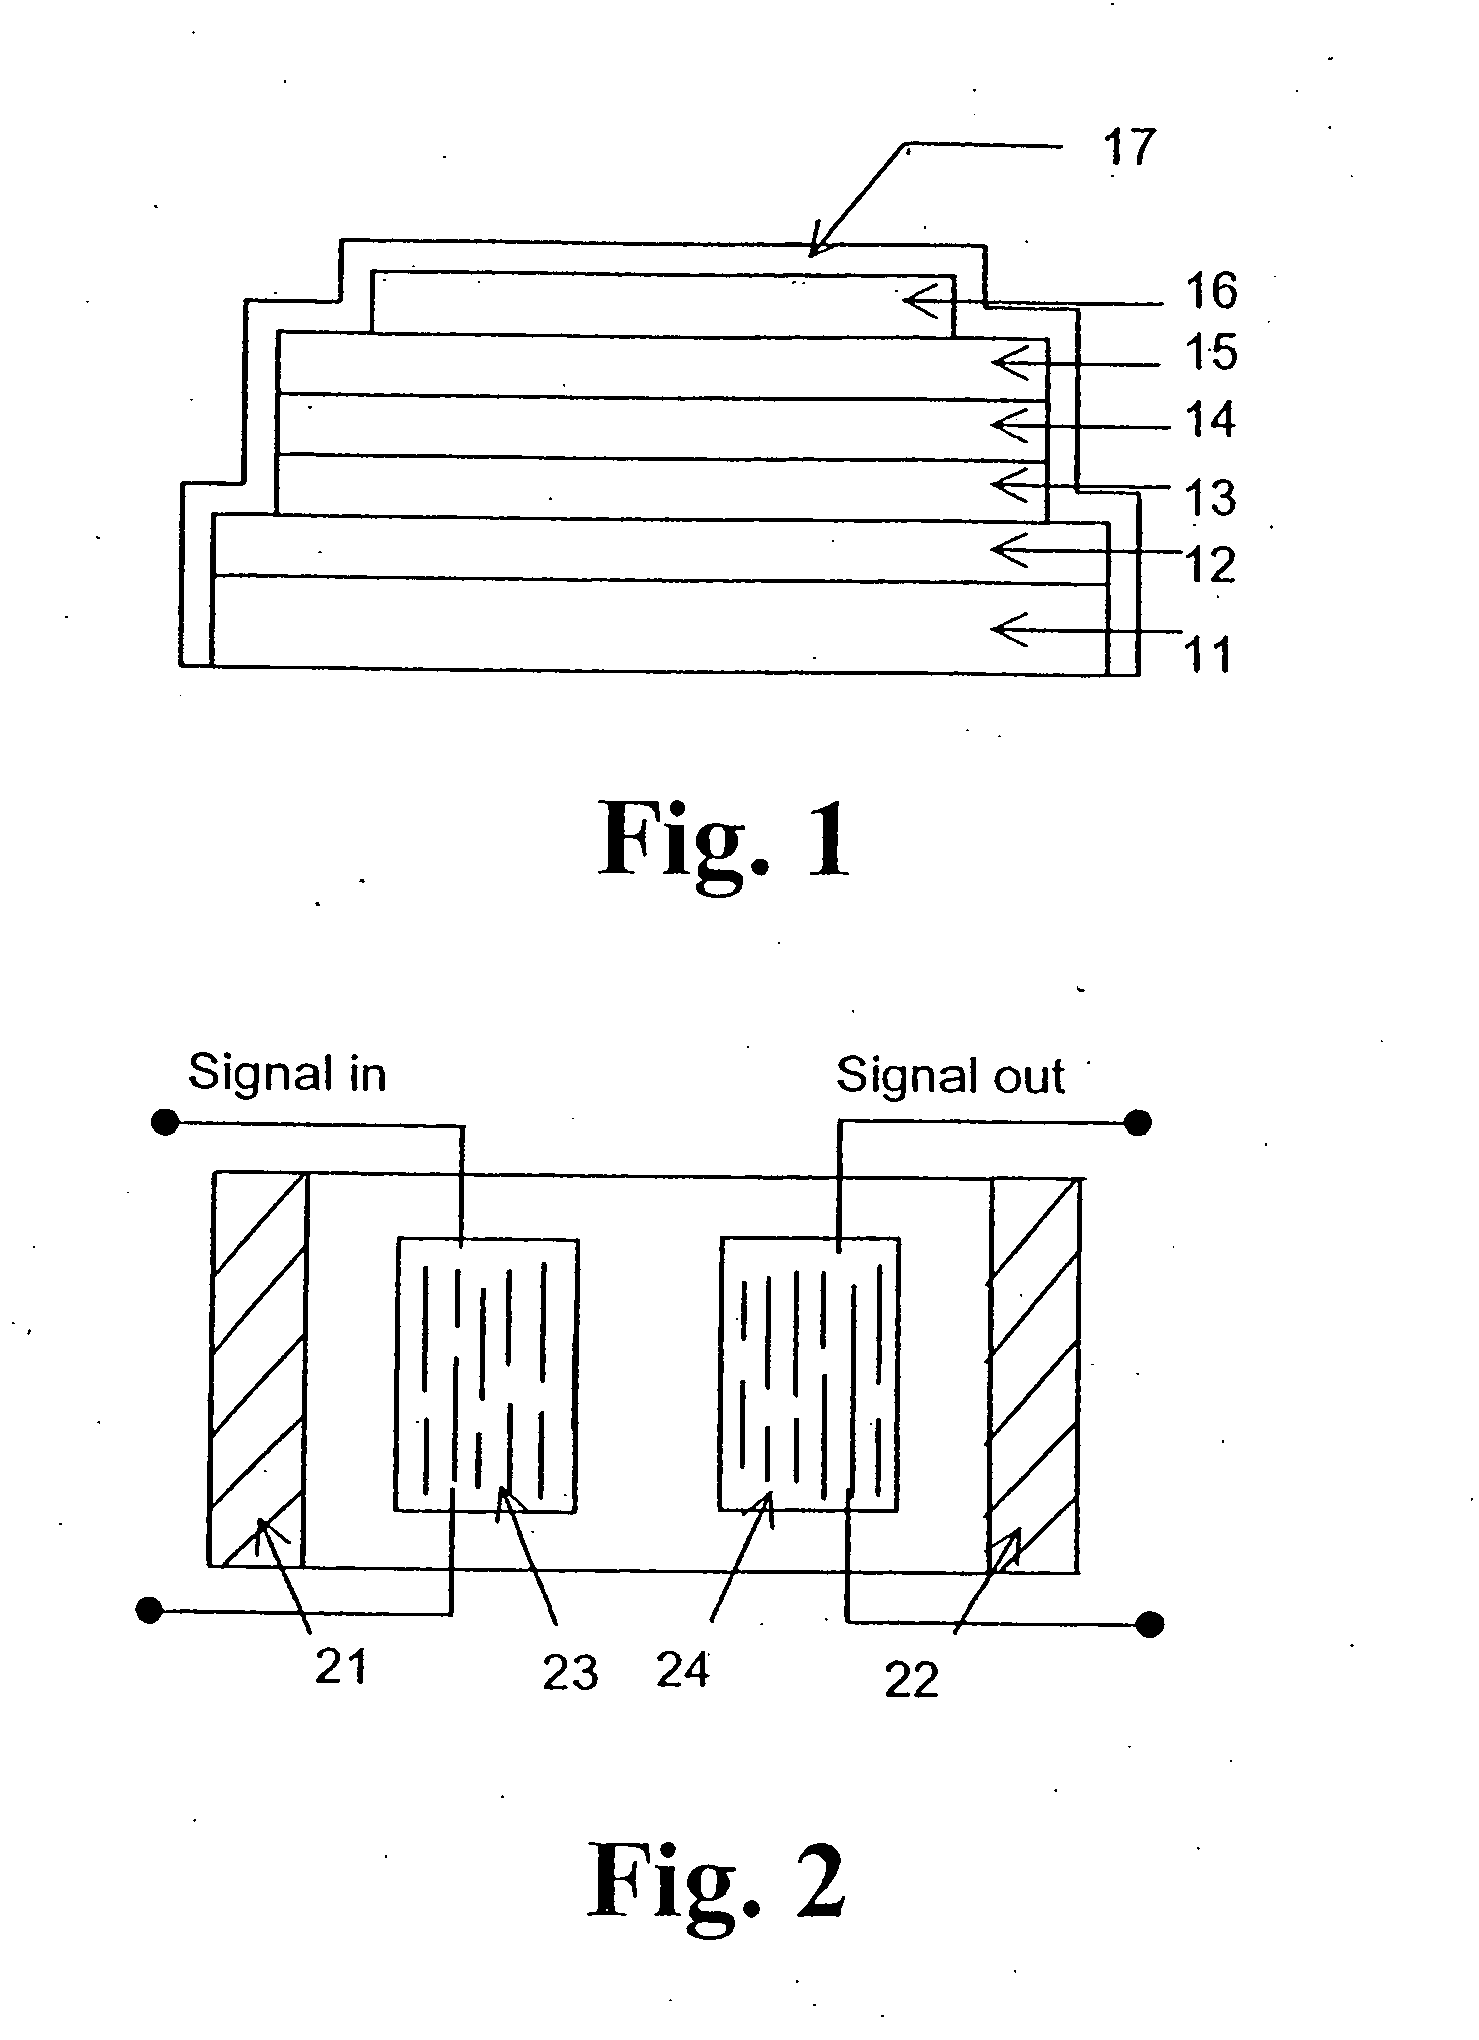 Process for producing metal oxide films at low temperatures